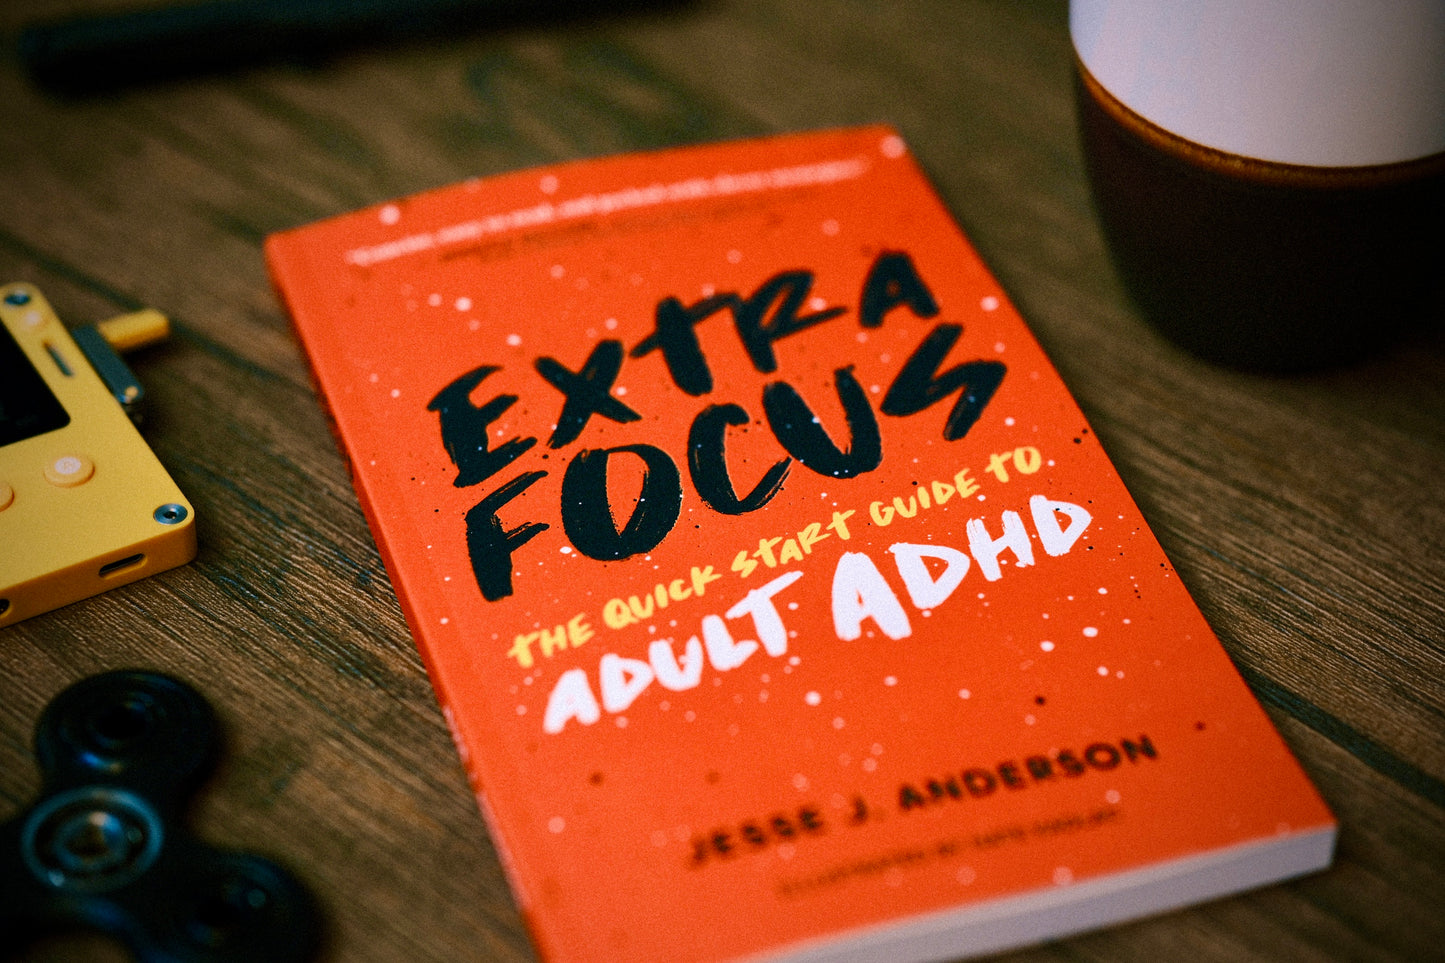 Extra Focus: The Quick Start Guide to Adult ADHD (Paperback)